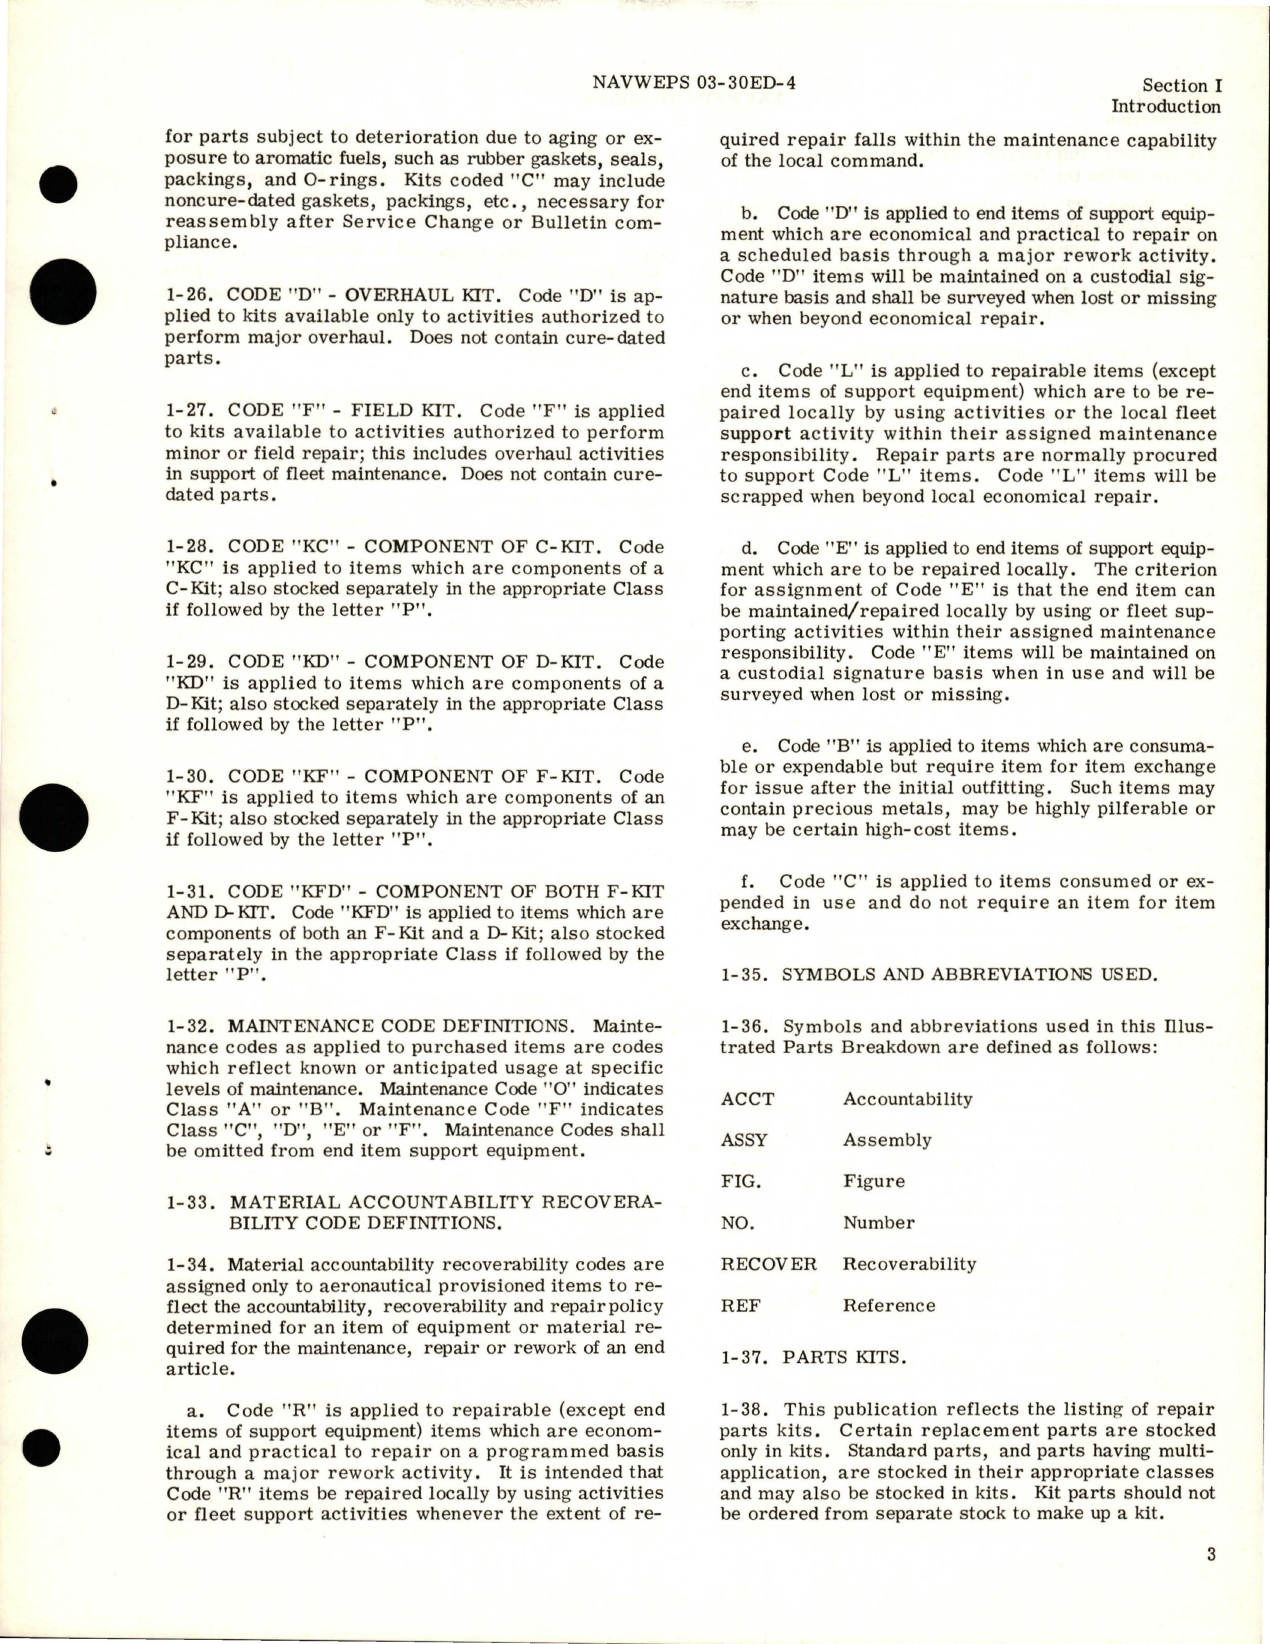 Sample page 5 from AirCorps Library document: Illustrated Parts Breakdown for Utility Hydraulic System Control Manifold Package Valve - Part 26C26605